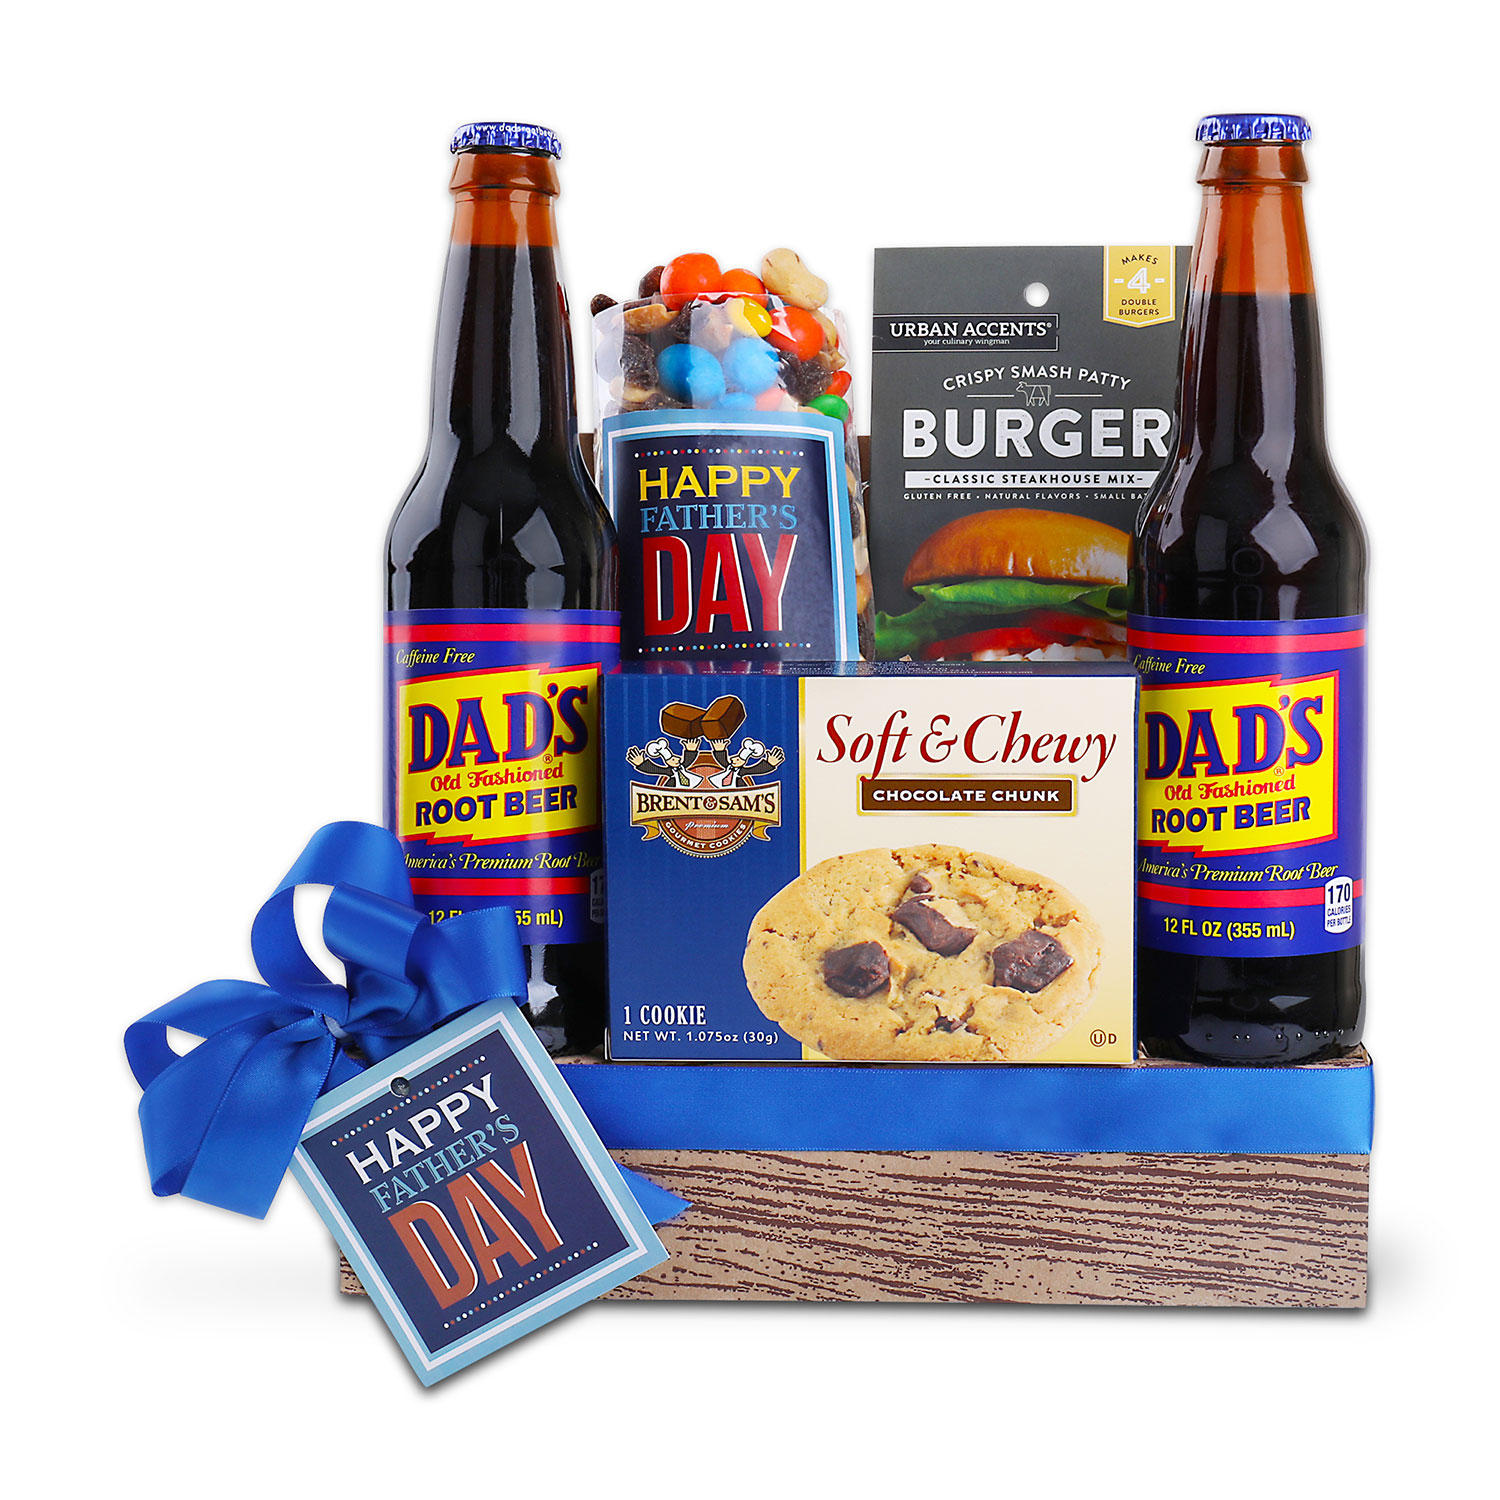 Happy Father's Day Gift Basket by Alder Creek